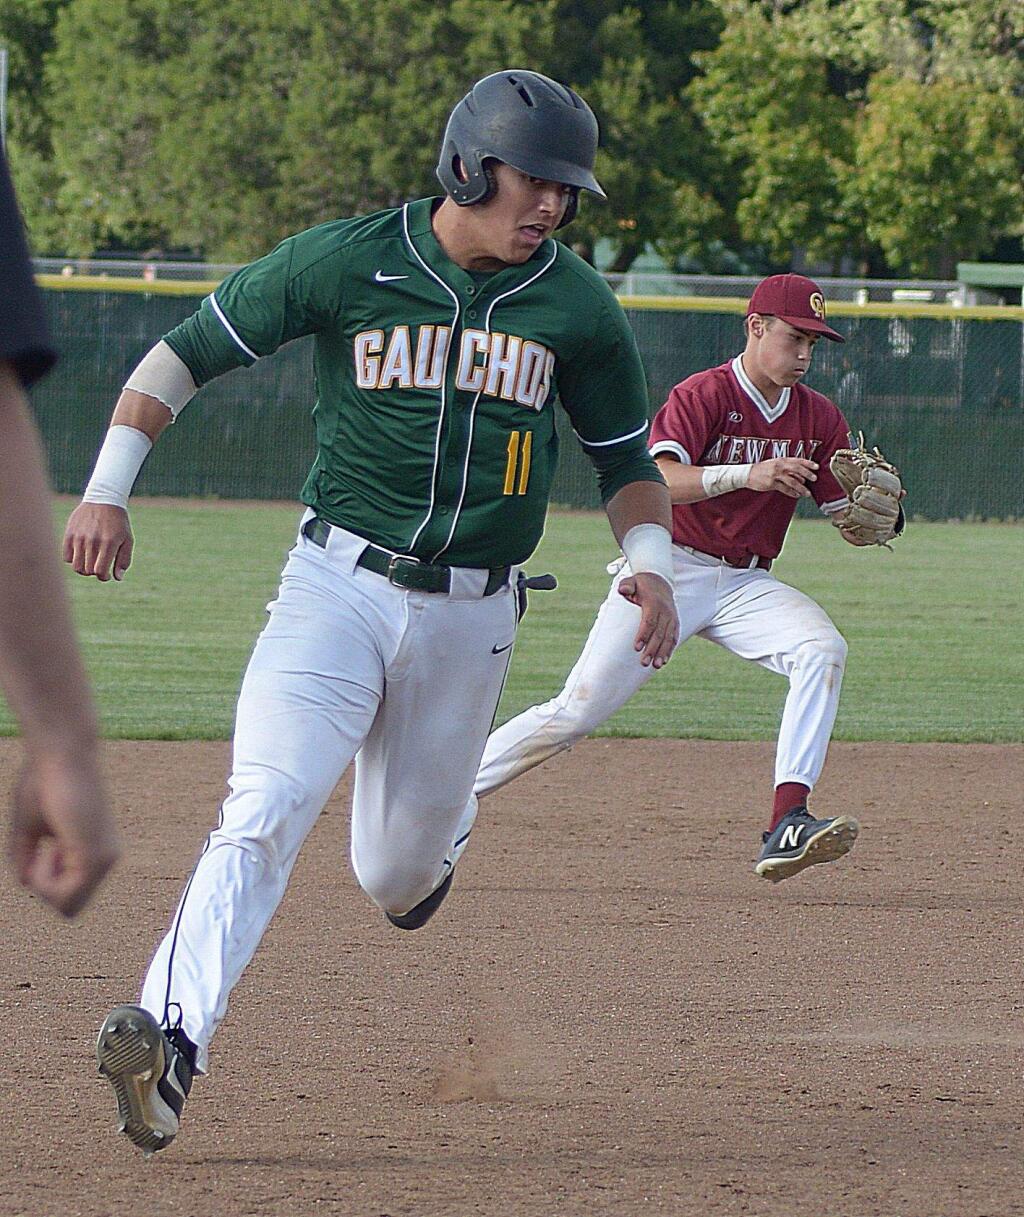 SUMNER FOWLER/FOR THE ARGUS-COURIERA.J. Miller and Casa Grande's Gauchos run in to the North Coast Section playoffs Wednesdaty, opening at home against Concord.